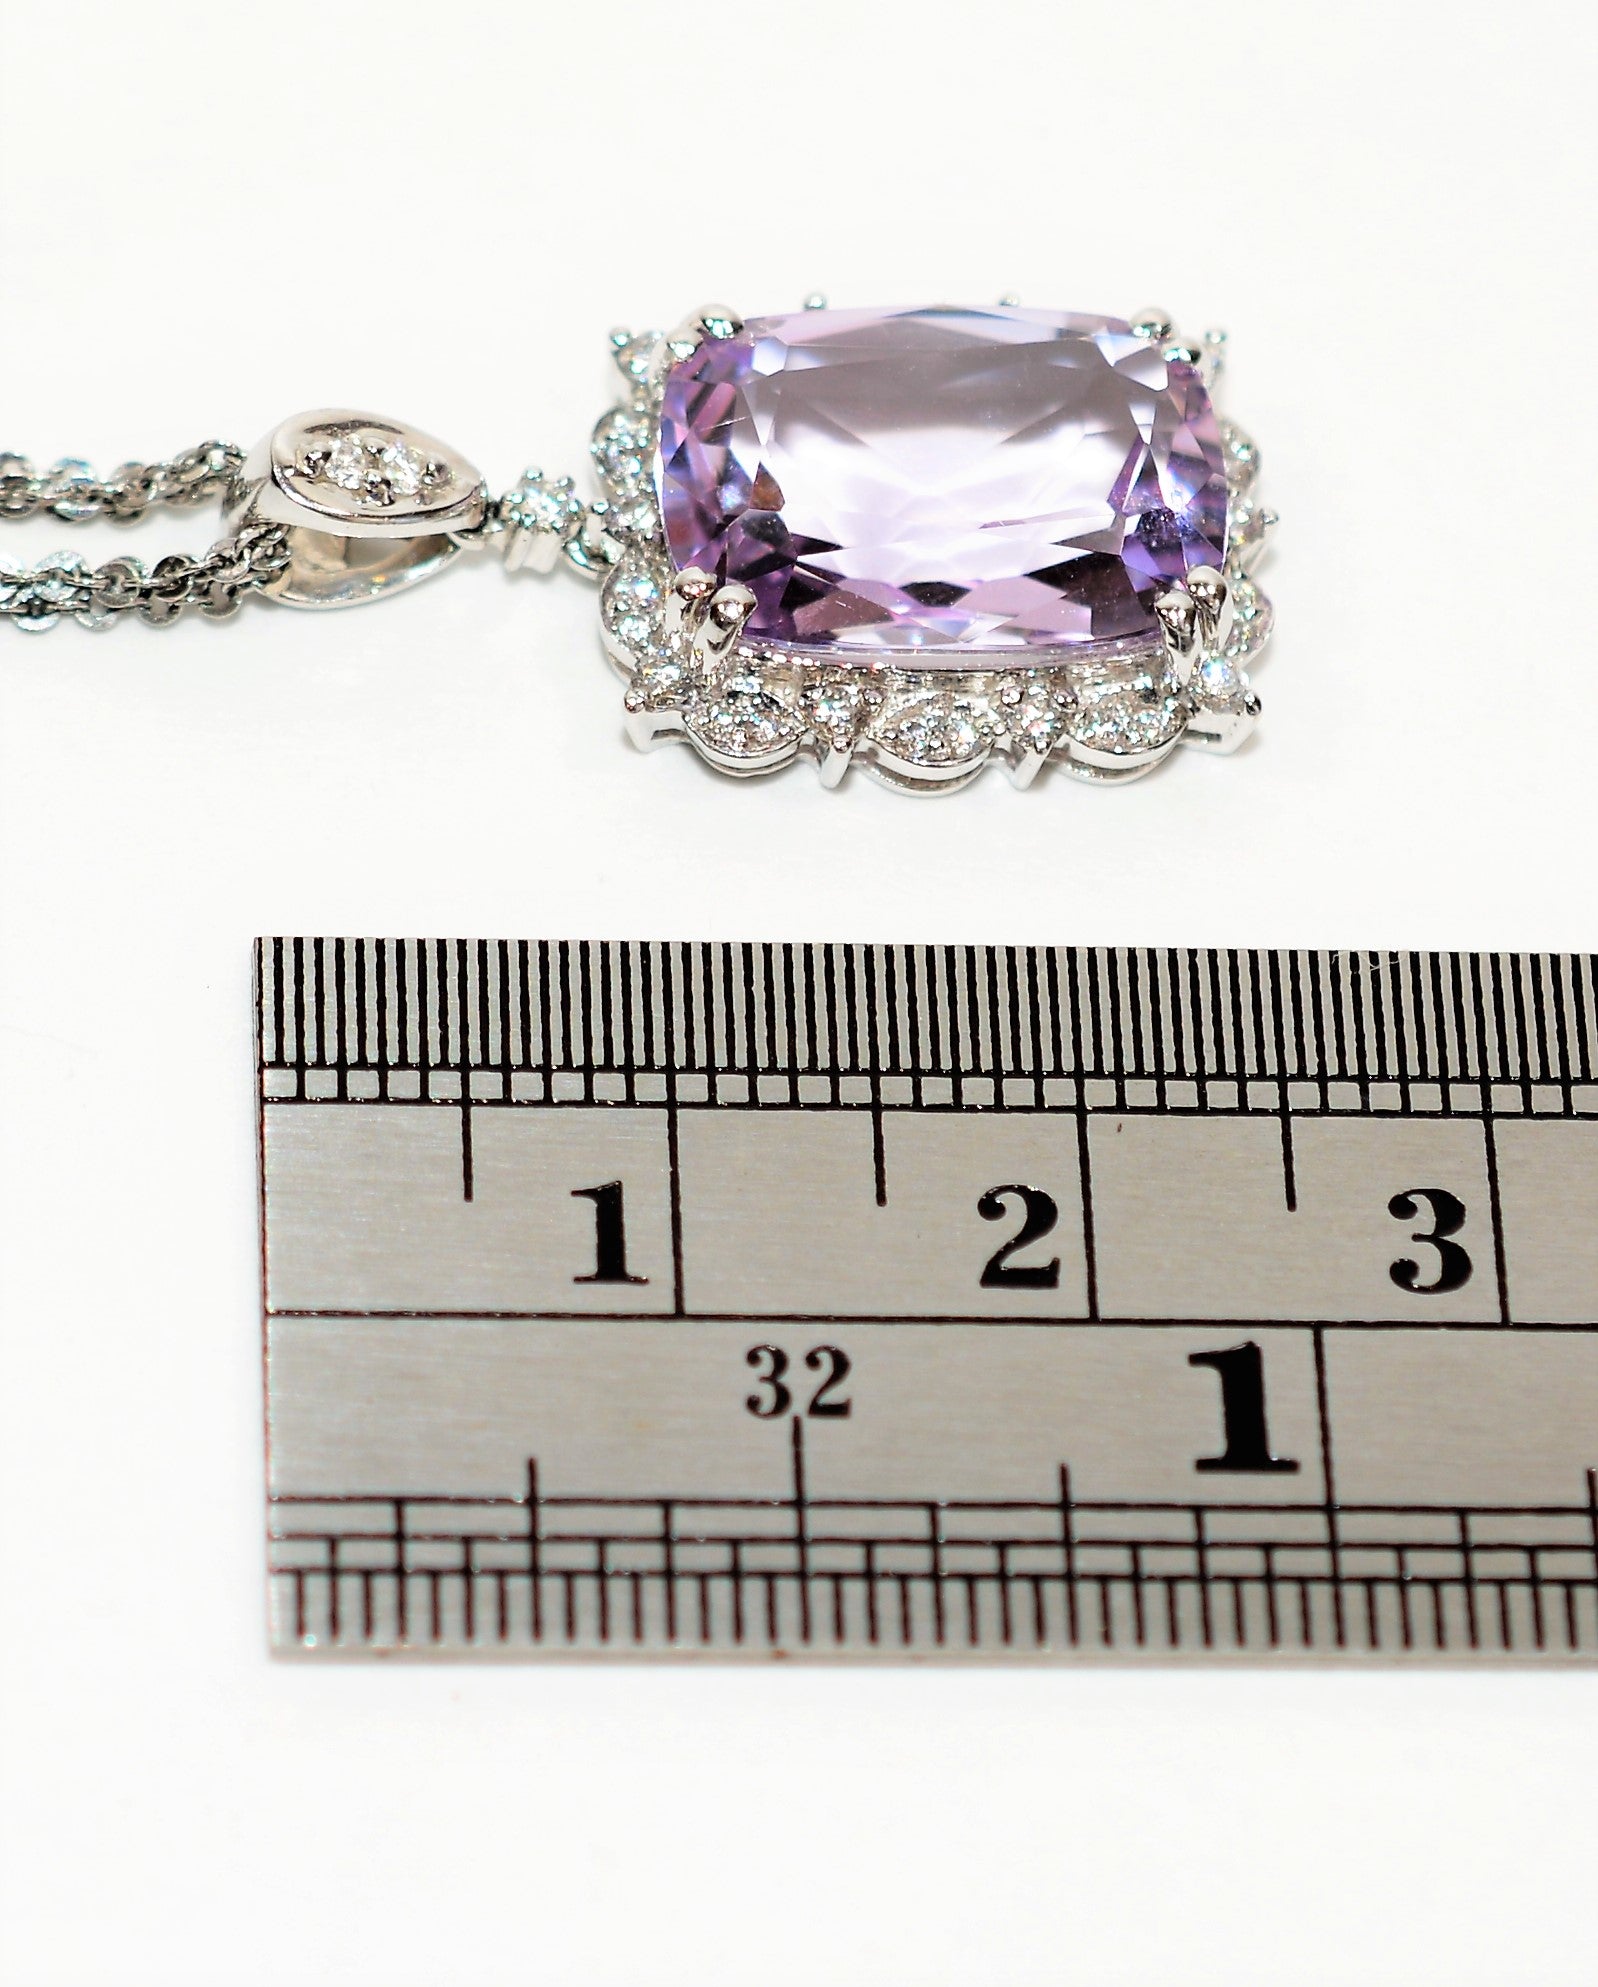 Natural Amethyst & Diamond Necklace 14K Solid White Gold  6.35tcw Pendant Necklace Statement Necklace Cocktail Necklace Multi-Strand Estate